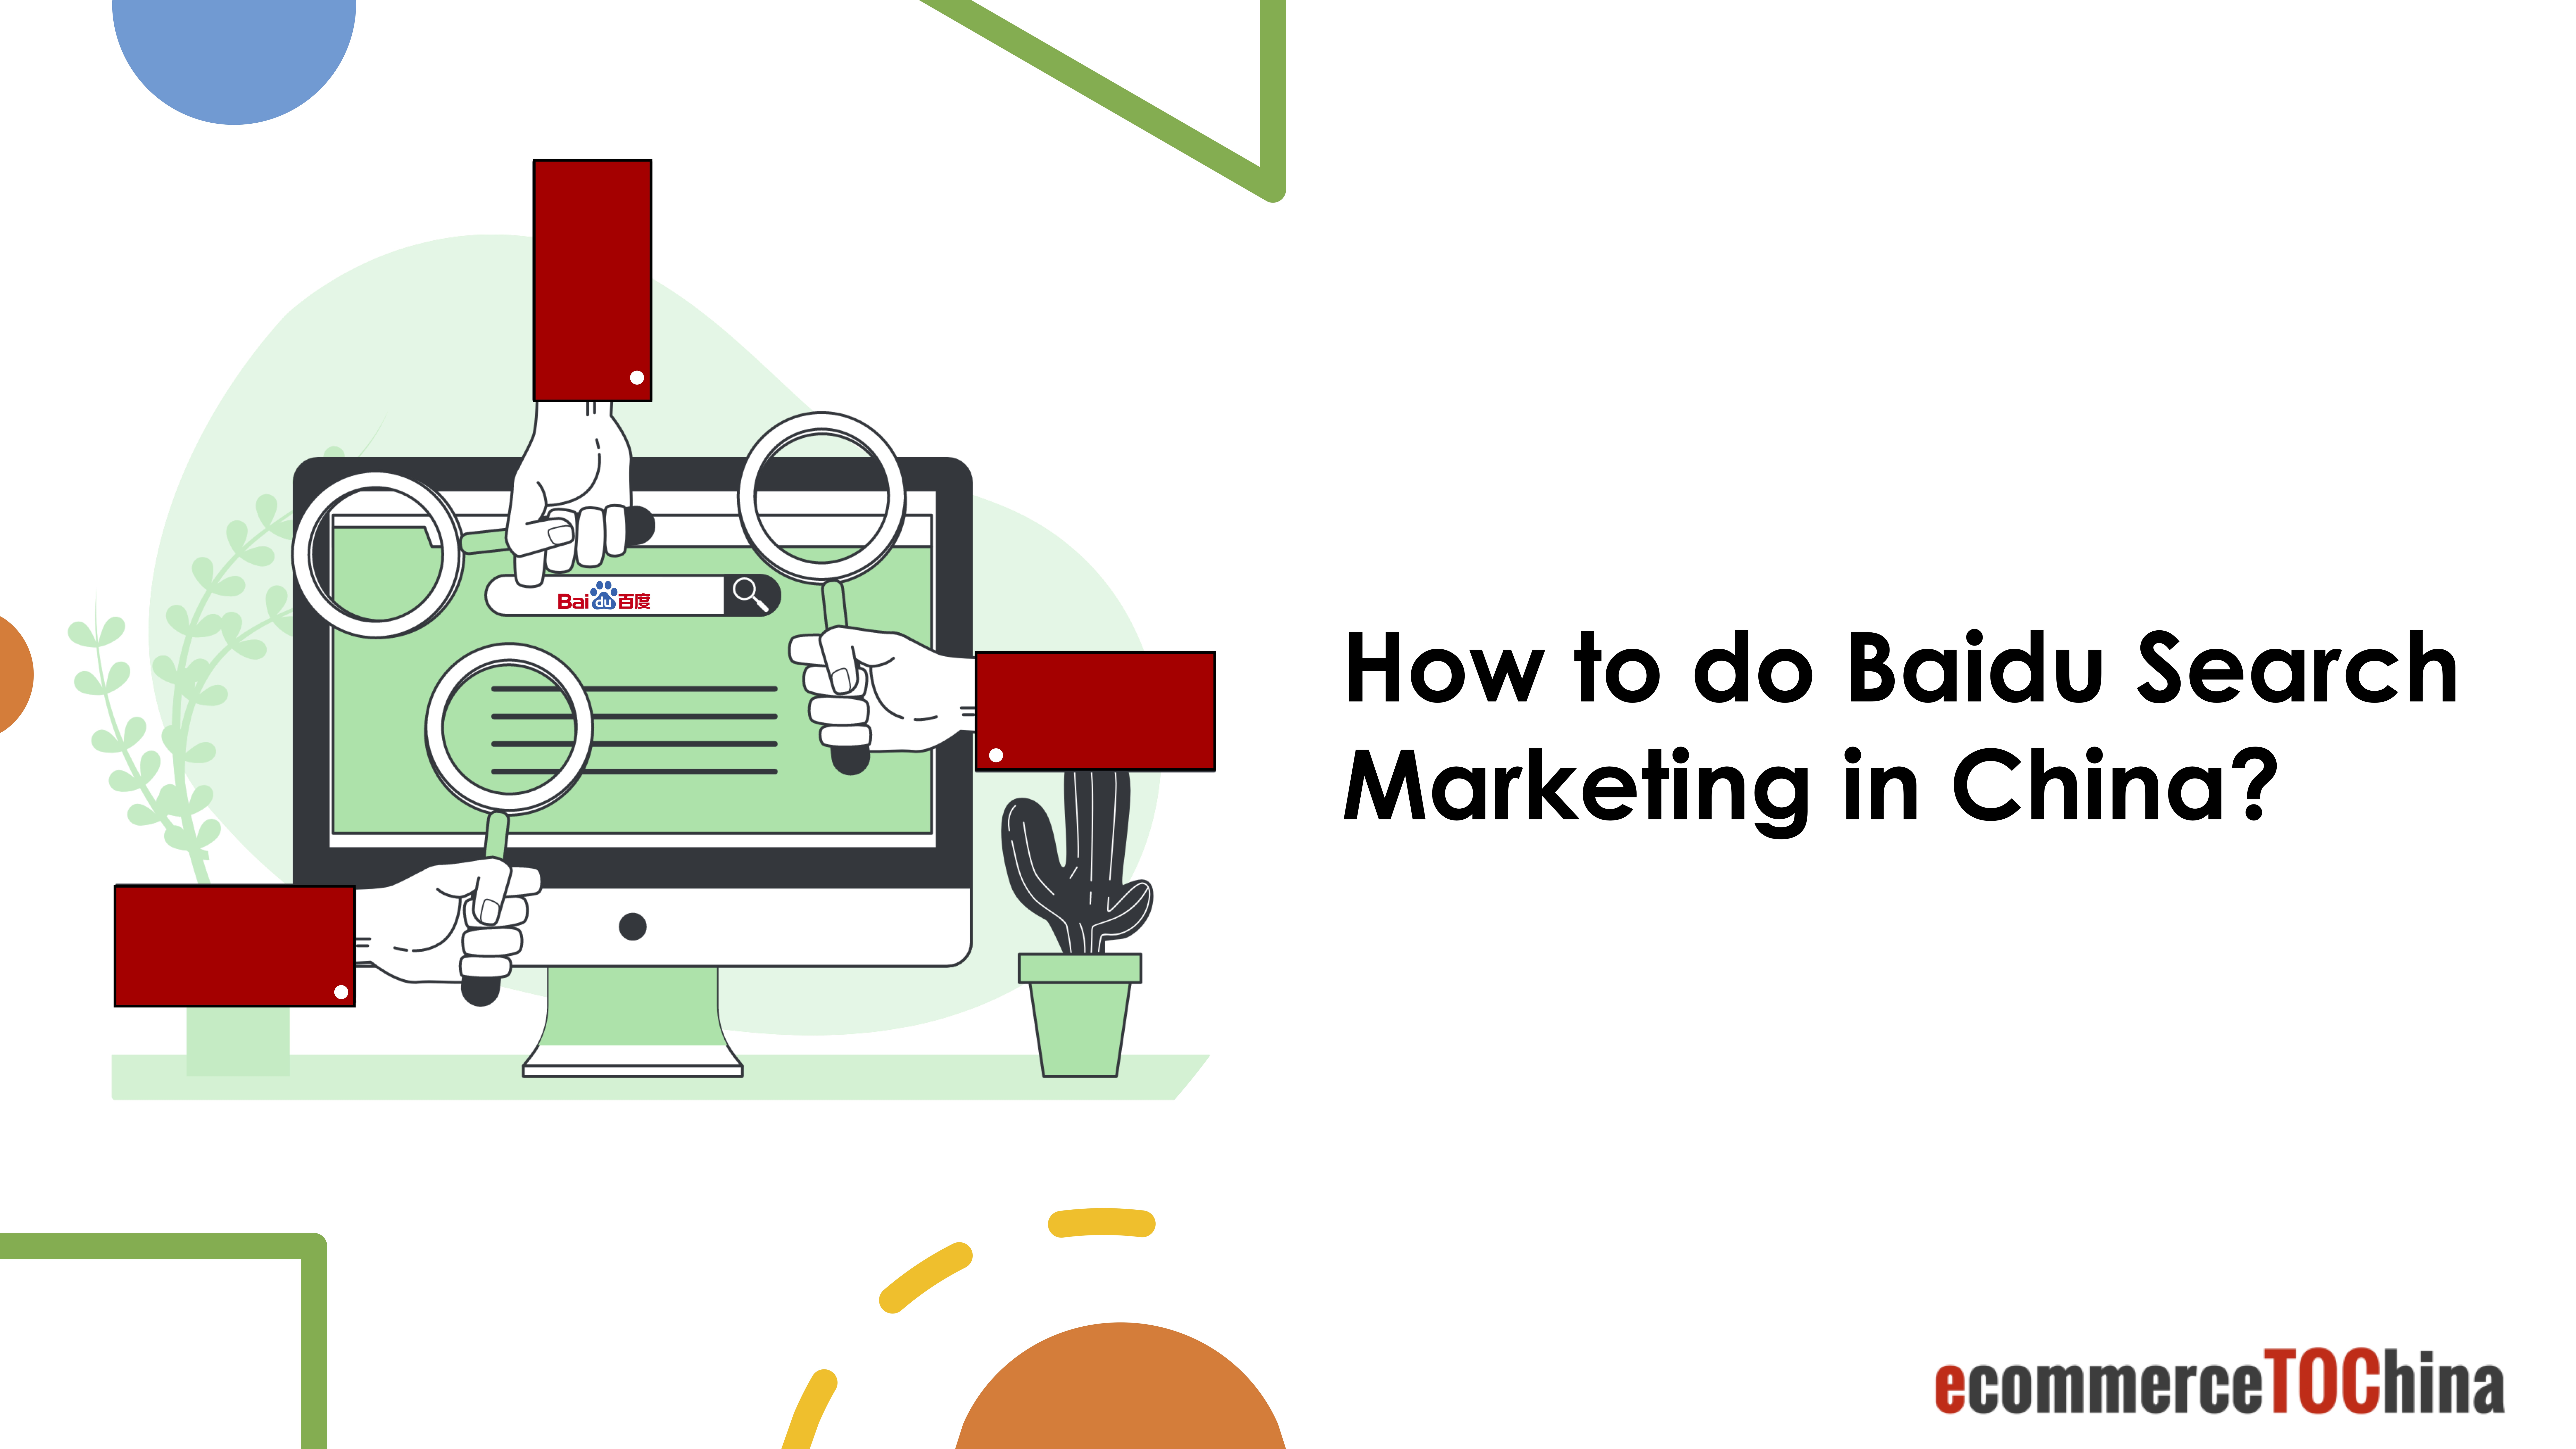 How to do Baidu Search Marketing in China?